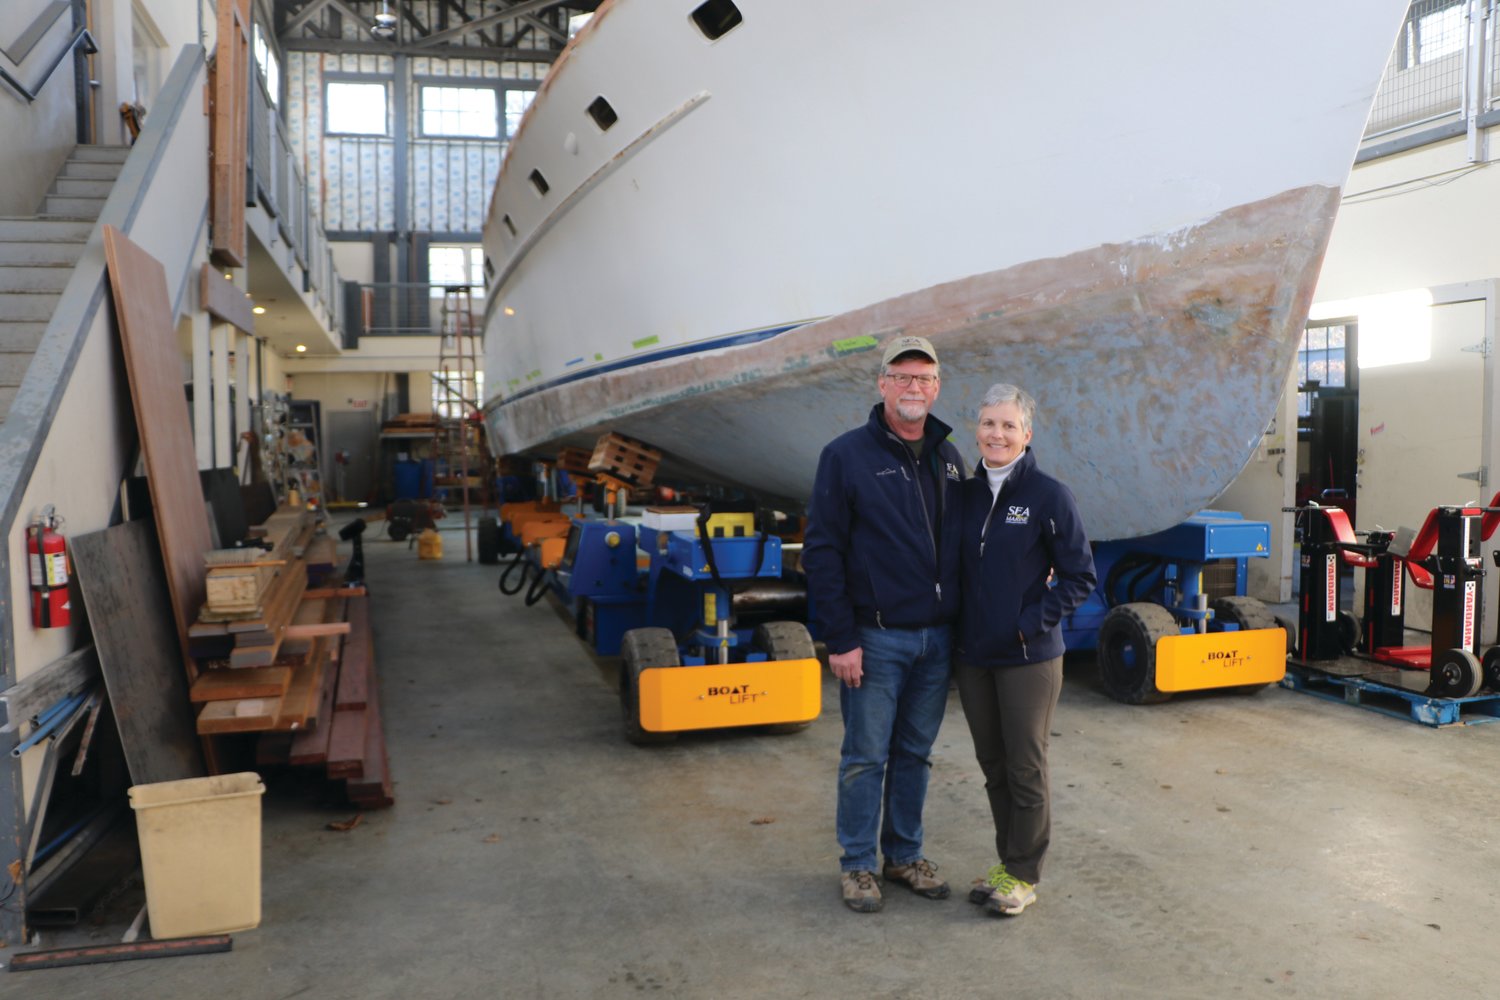 Pat and Sara Shannon, co-owners of SEA Marine, stand before their historic Rybovich yacht, mid-restoration.